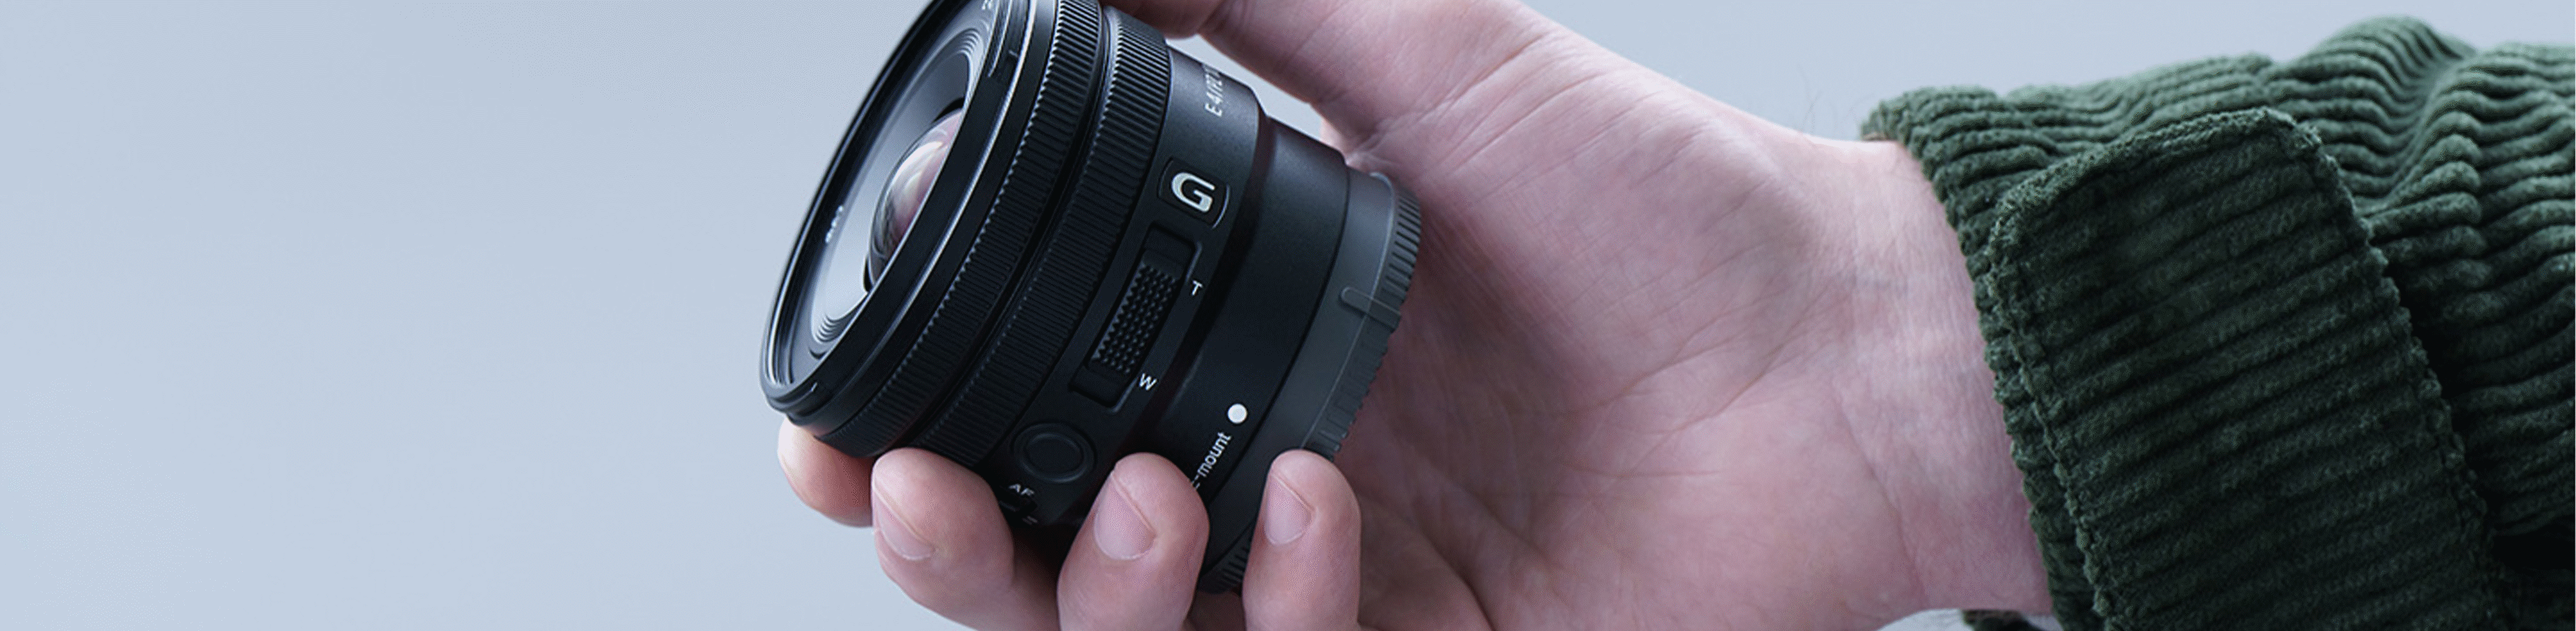 Image of a person's hand holding the E PZ 10-20mm F4 G, showing that the lens is small enough to fit in their hand